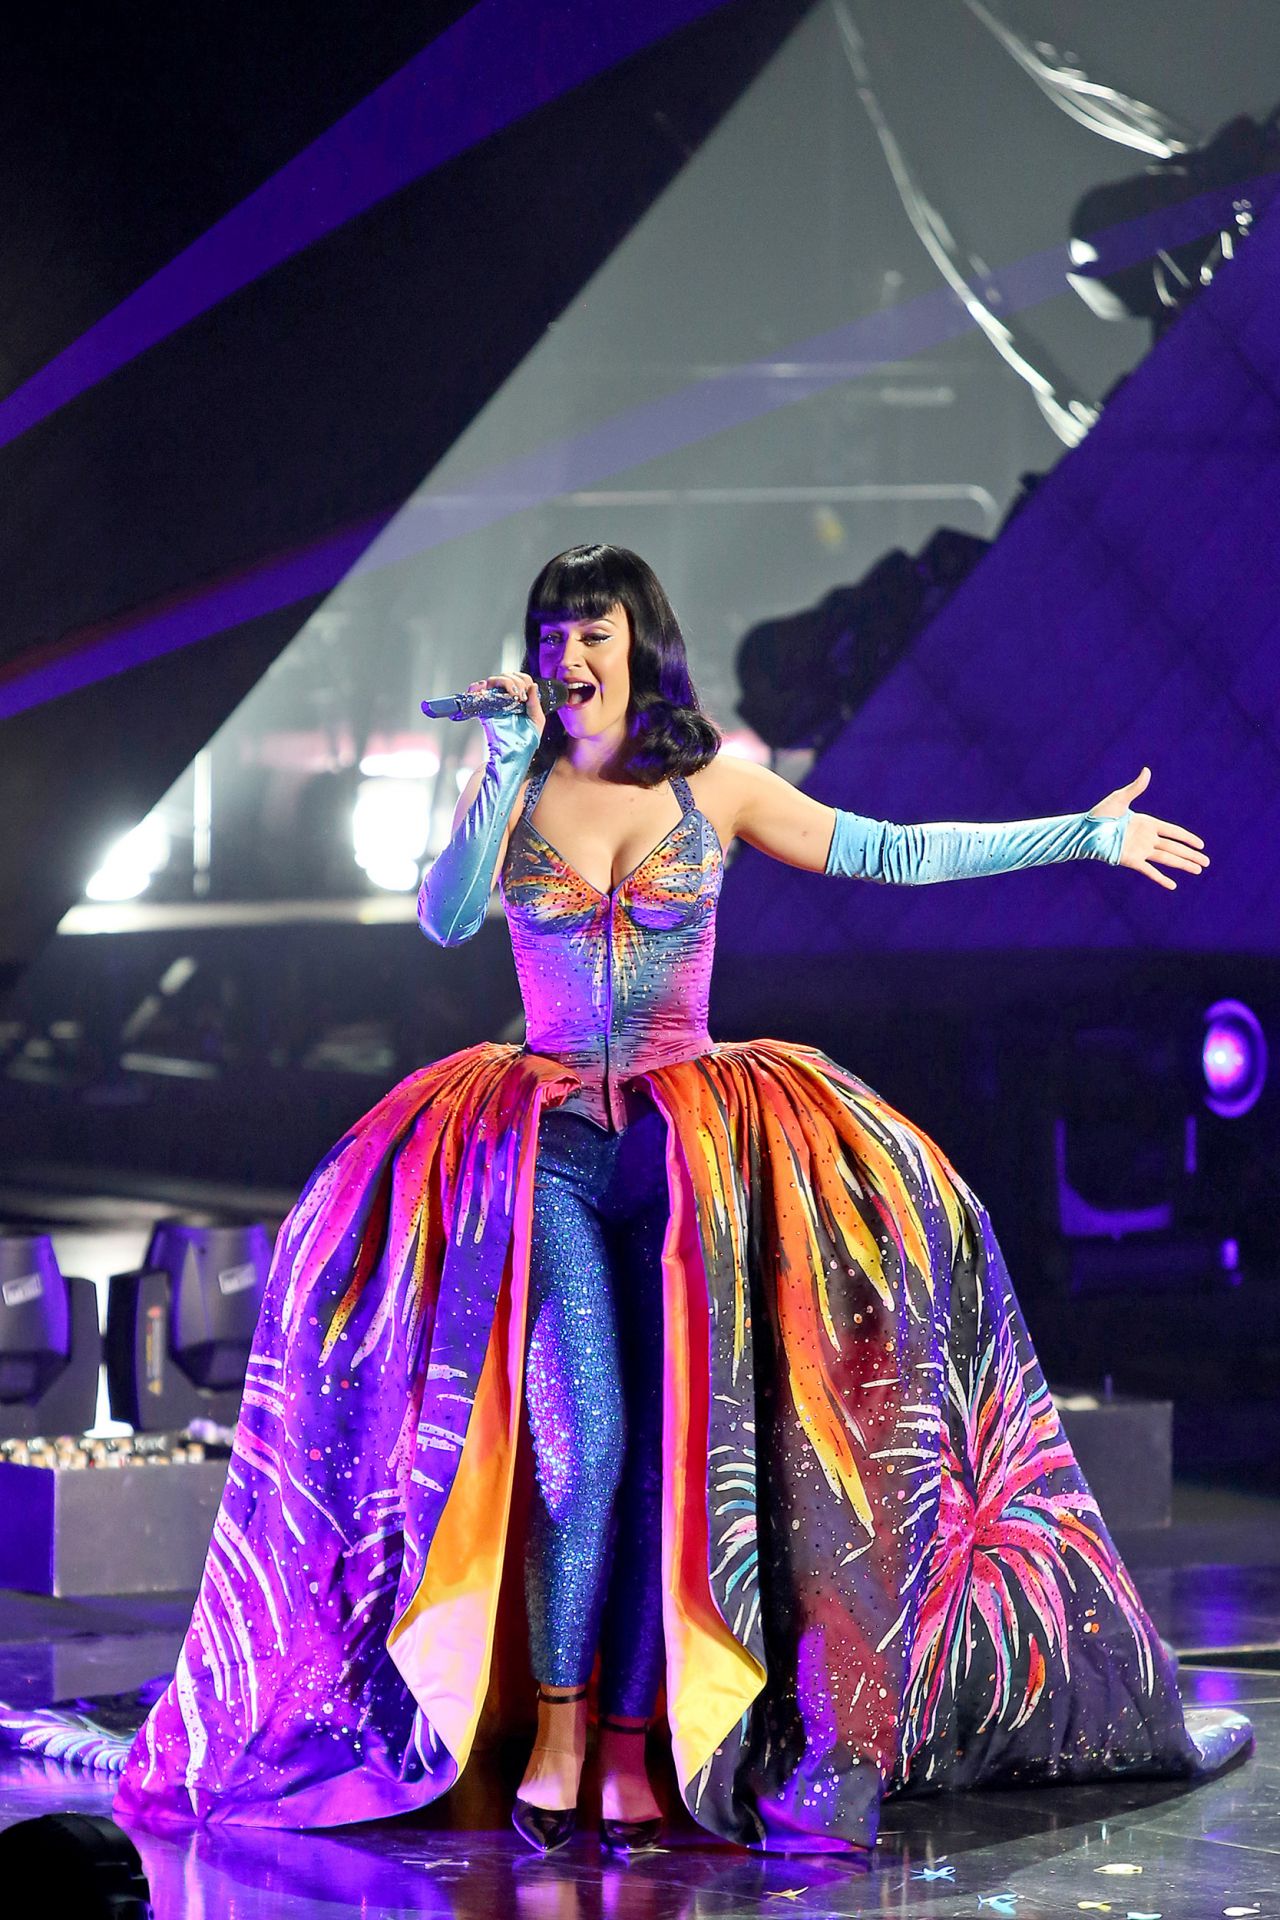 Katy Perry Performs at 'Prismatic' Concert Tour in Winnipeg, Canada ...